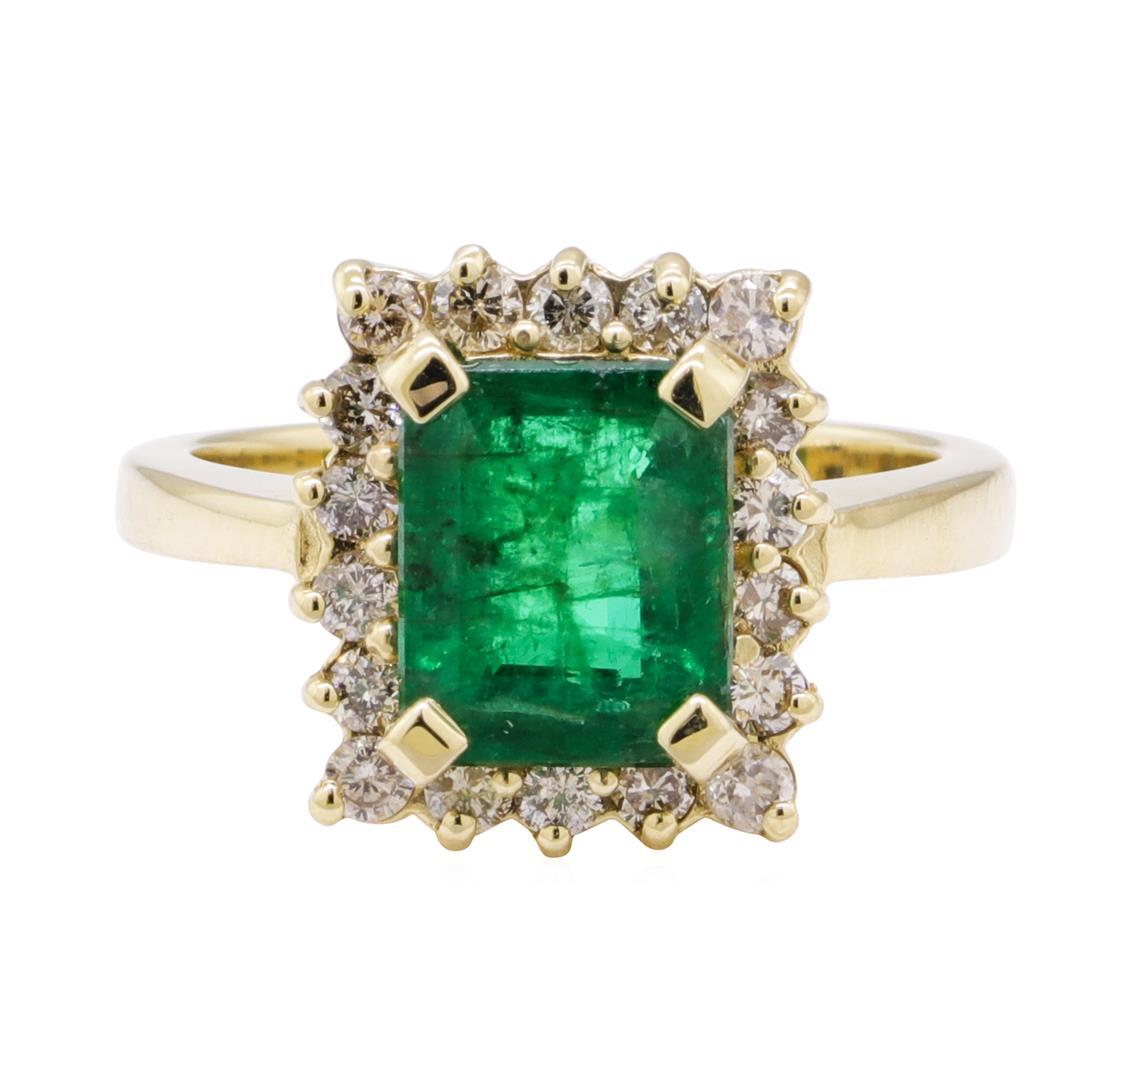 2.90 ctw Emerald and Diamond Ring - 14KT Yellow Gold